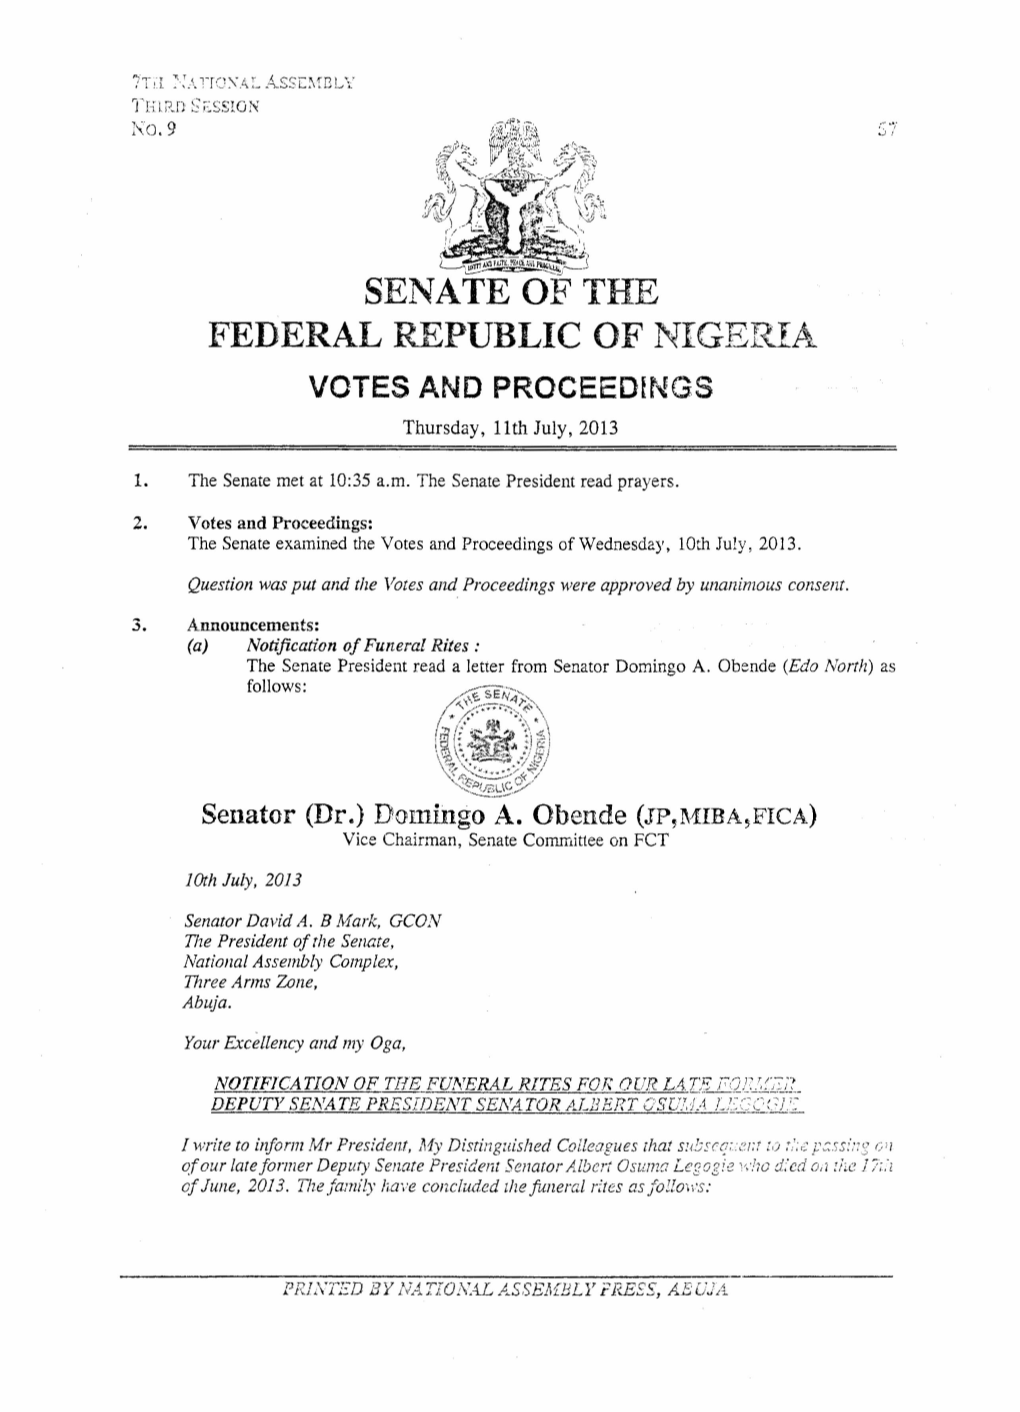 SENATE of the FEDERAL REPUBLIC of NIGERIA VOTES and Proceedfngs Thursday, 11Th July, 2013